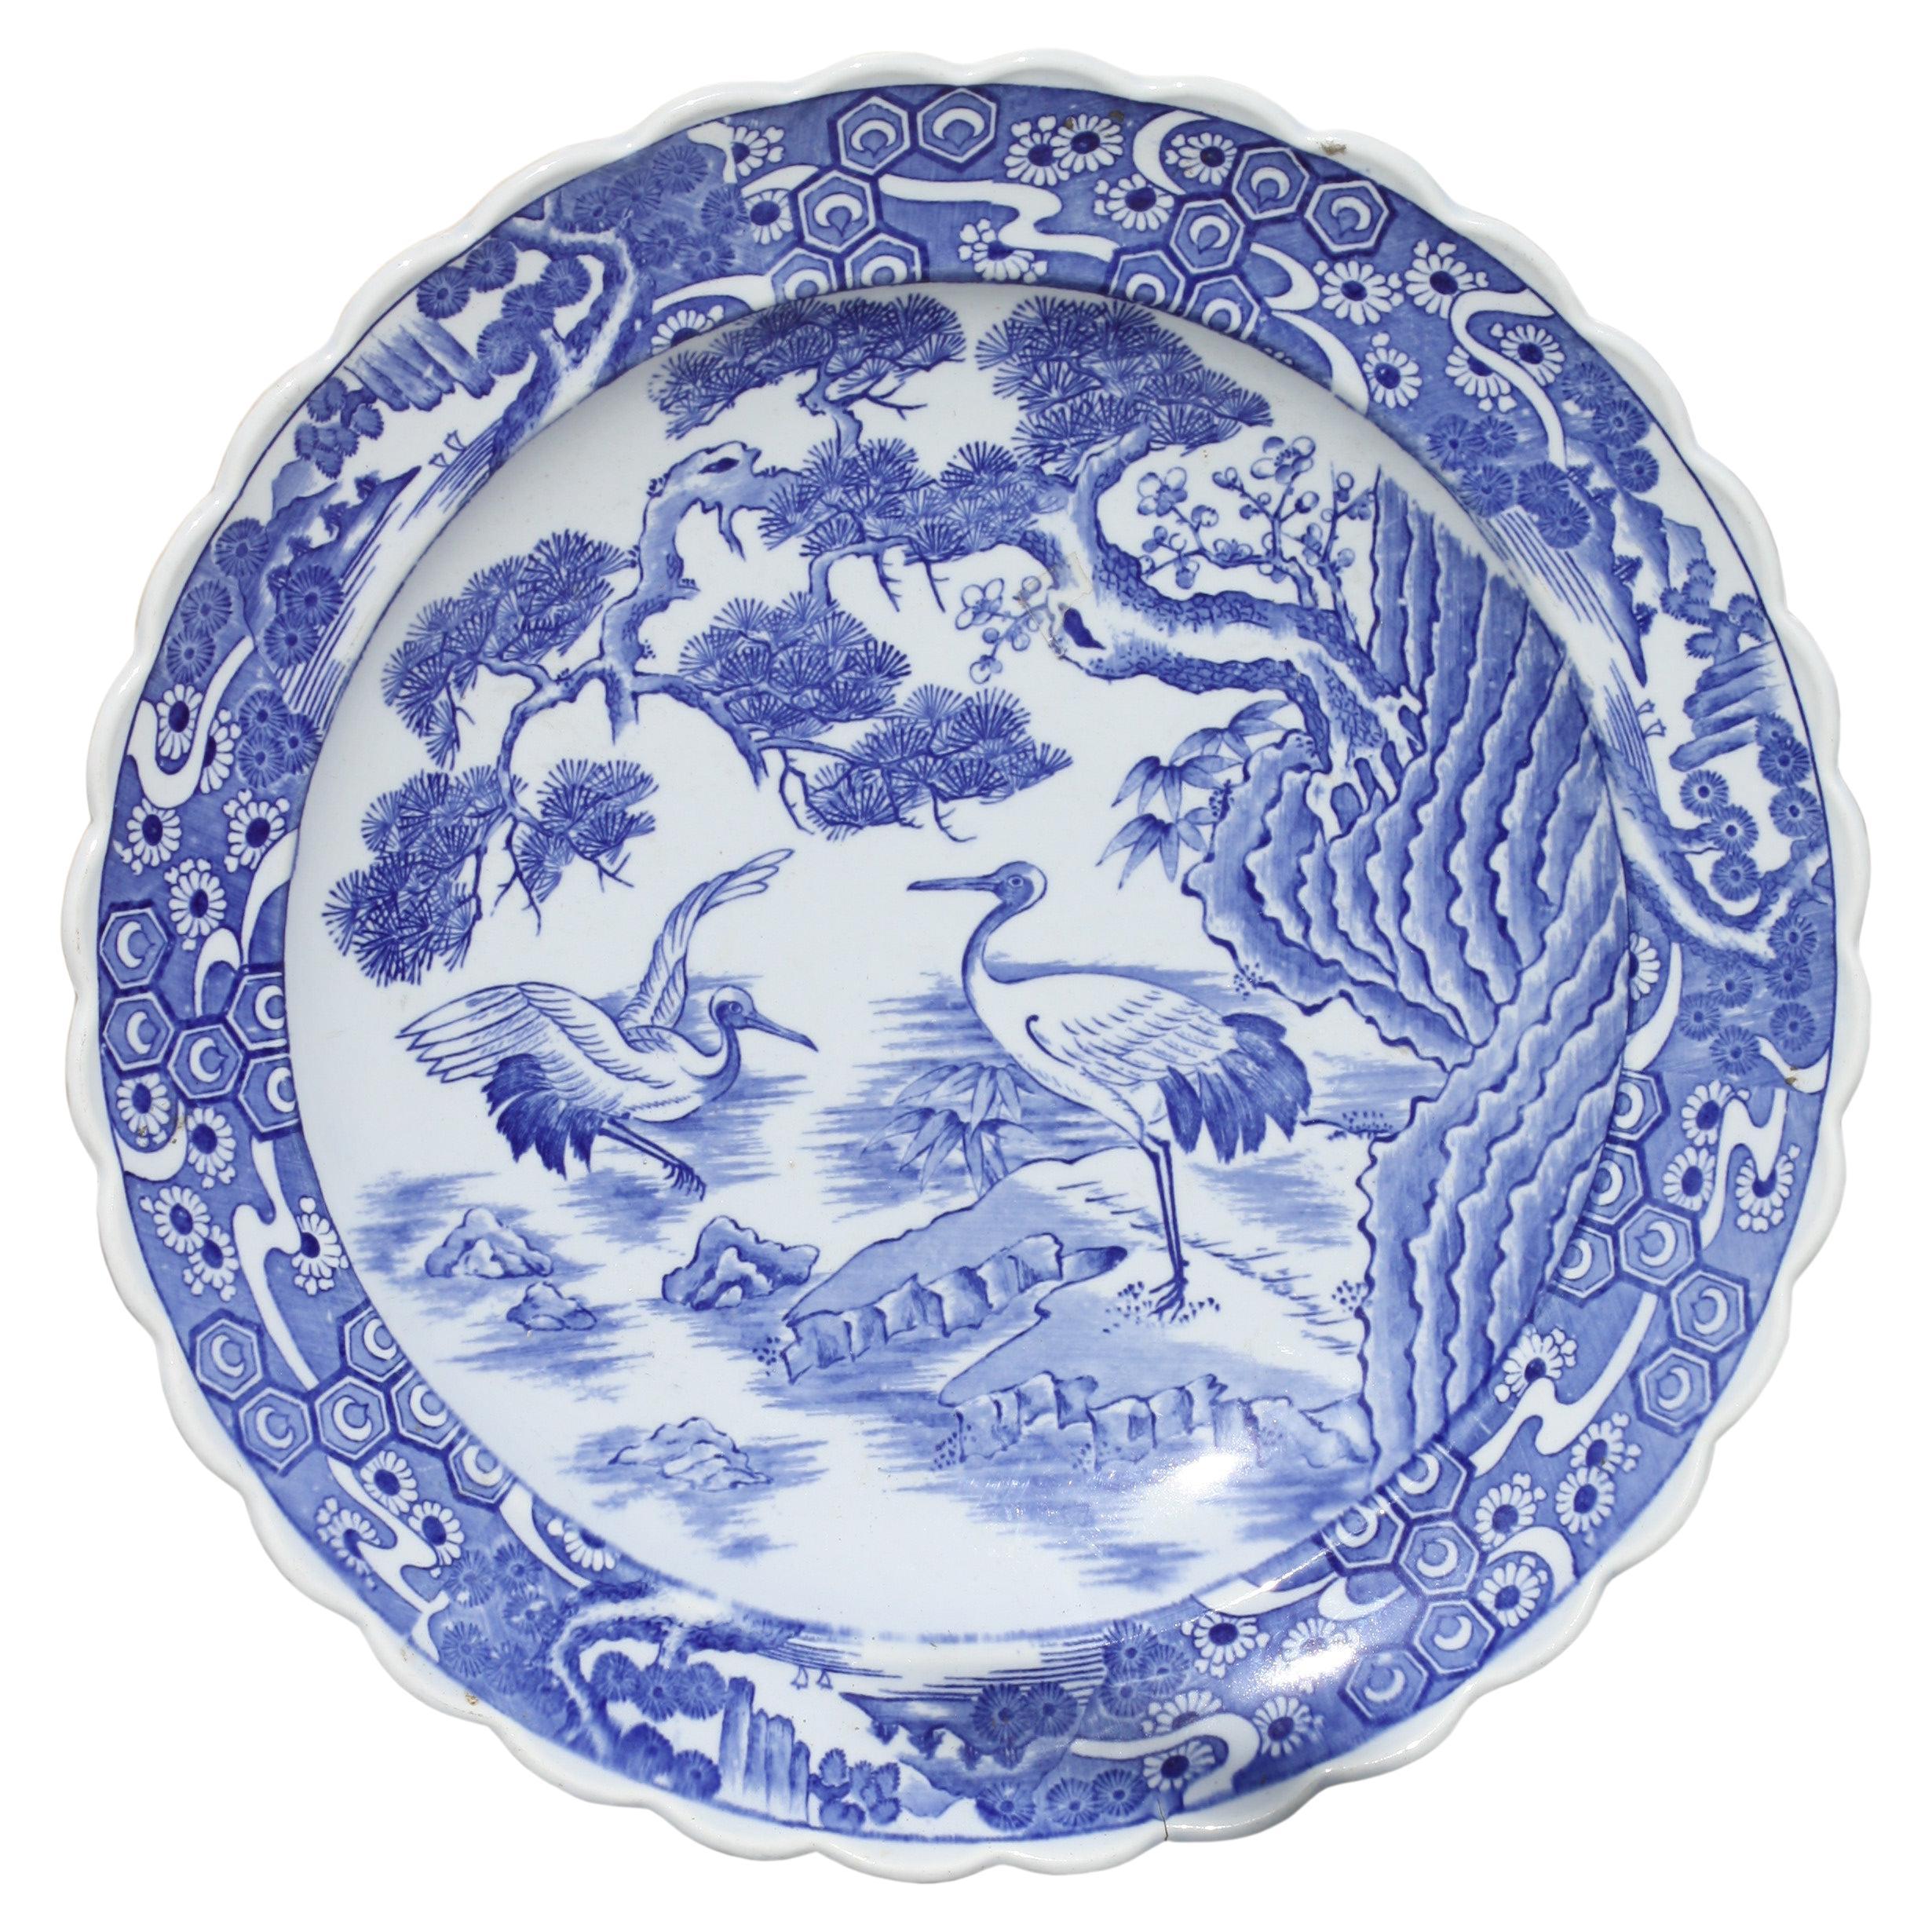 Japanese Blue and White Decorated Porcelain Plate, Meiji Period (1868-1912) For Sale